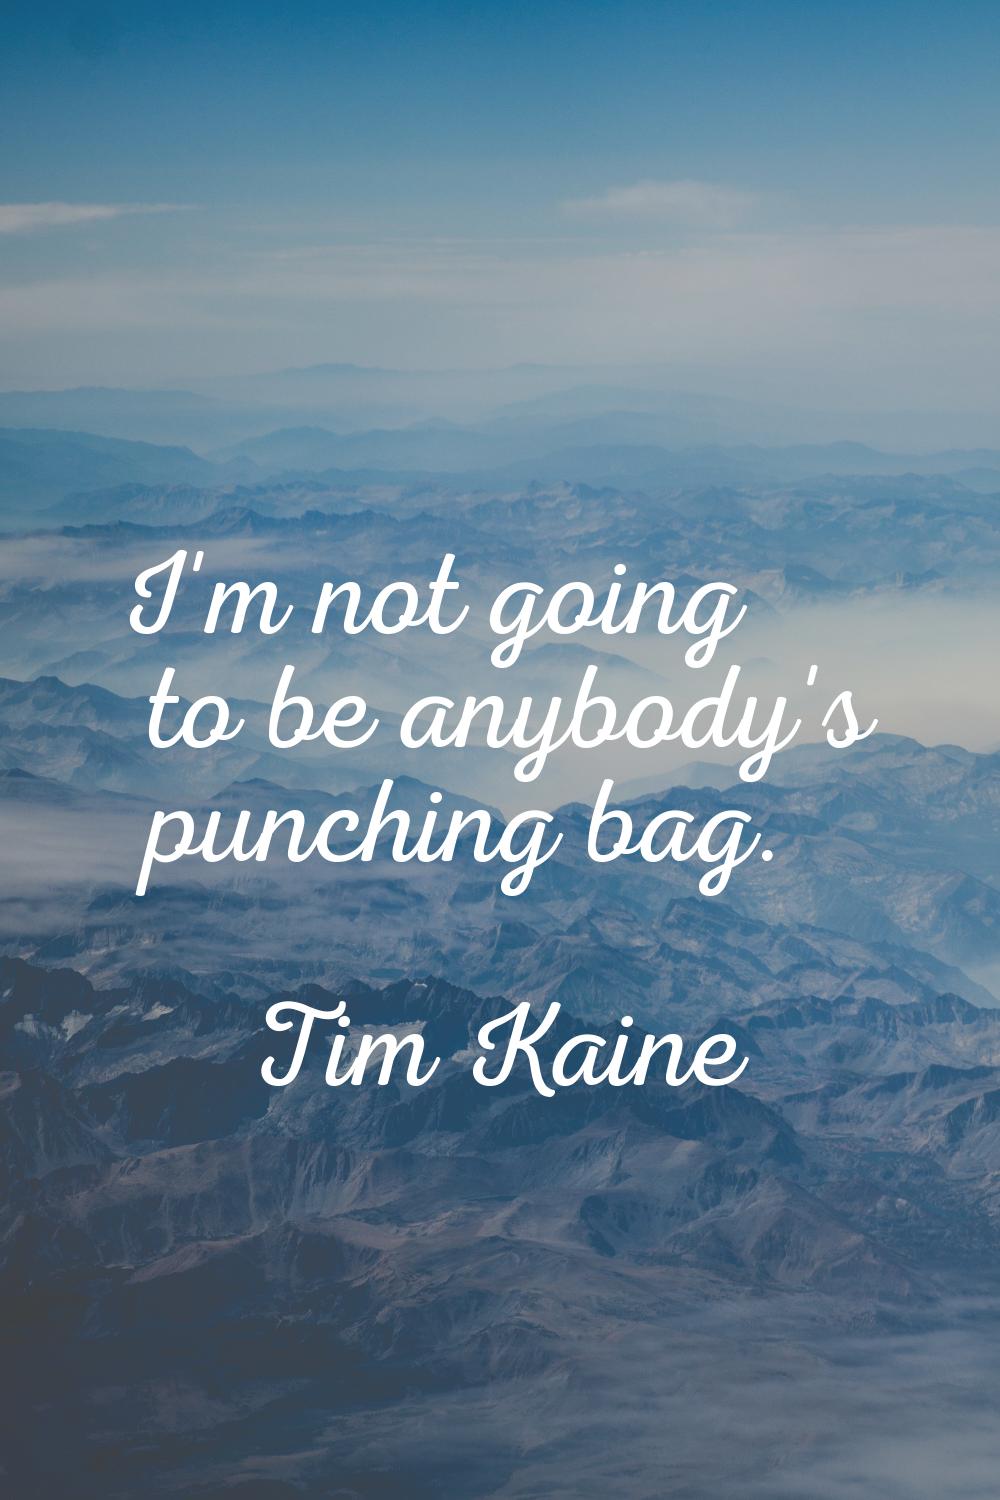 I'm not going to be anybody's punching bag.